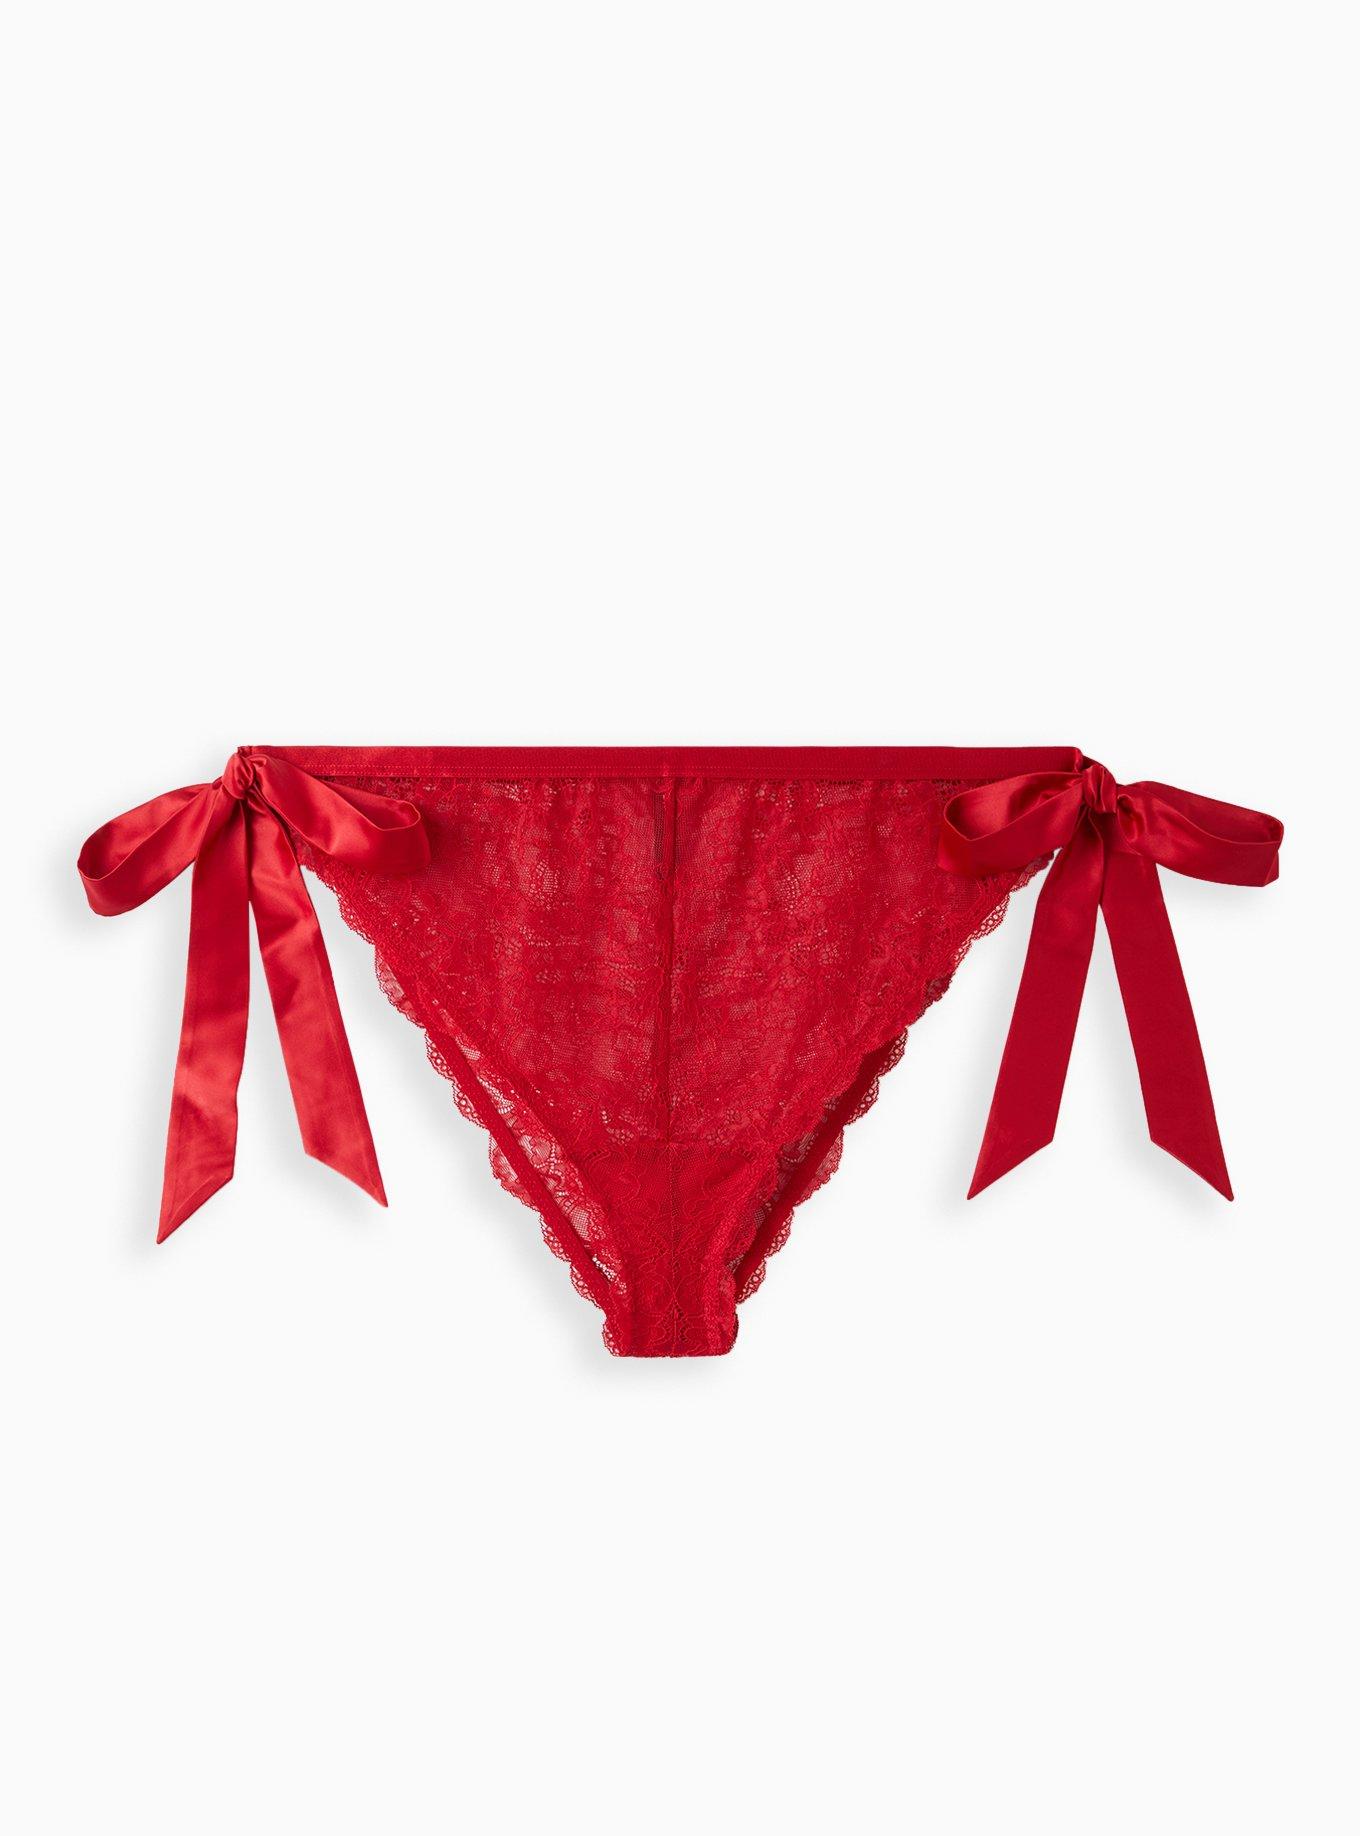 Plus Size - Tanga Panty - Lace Side Bow Red - Torrid